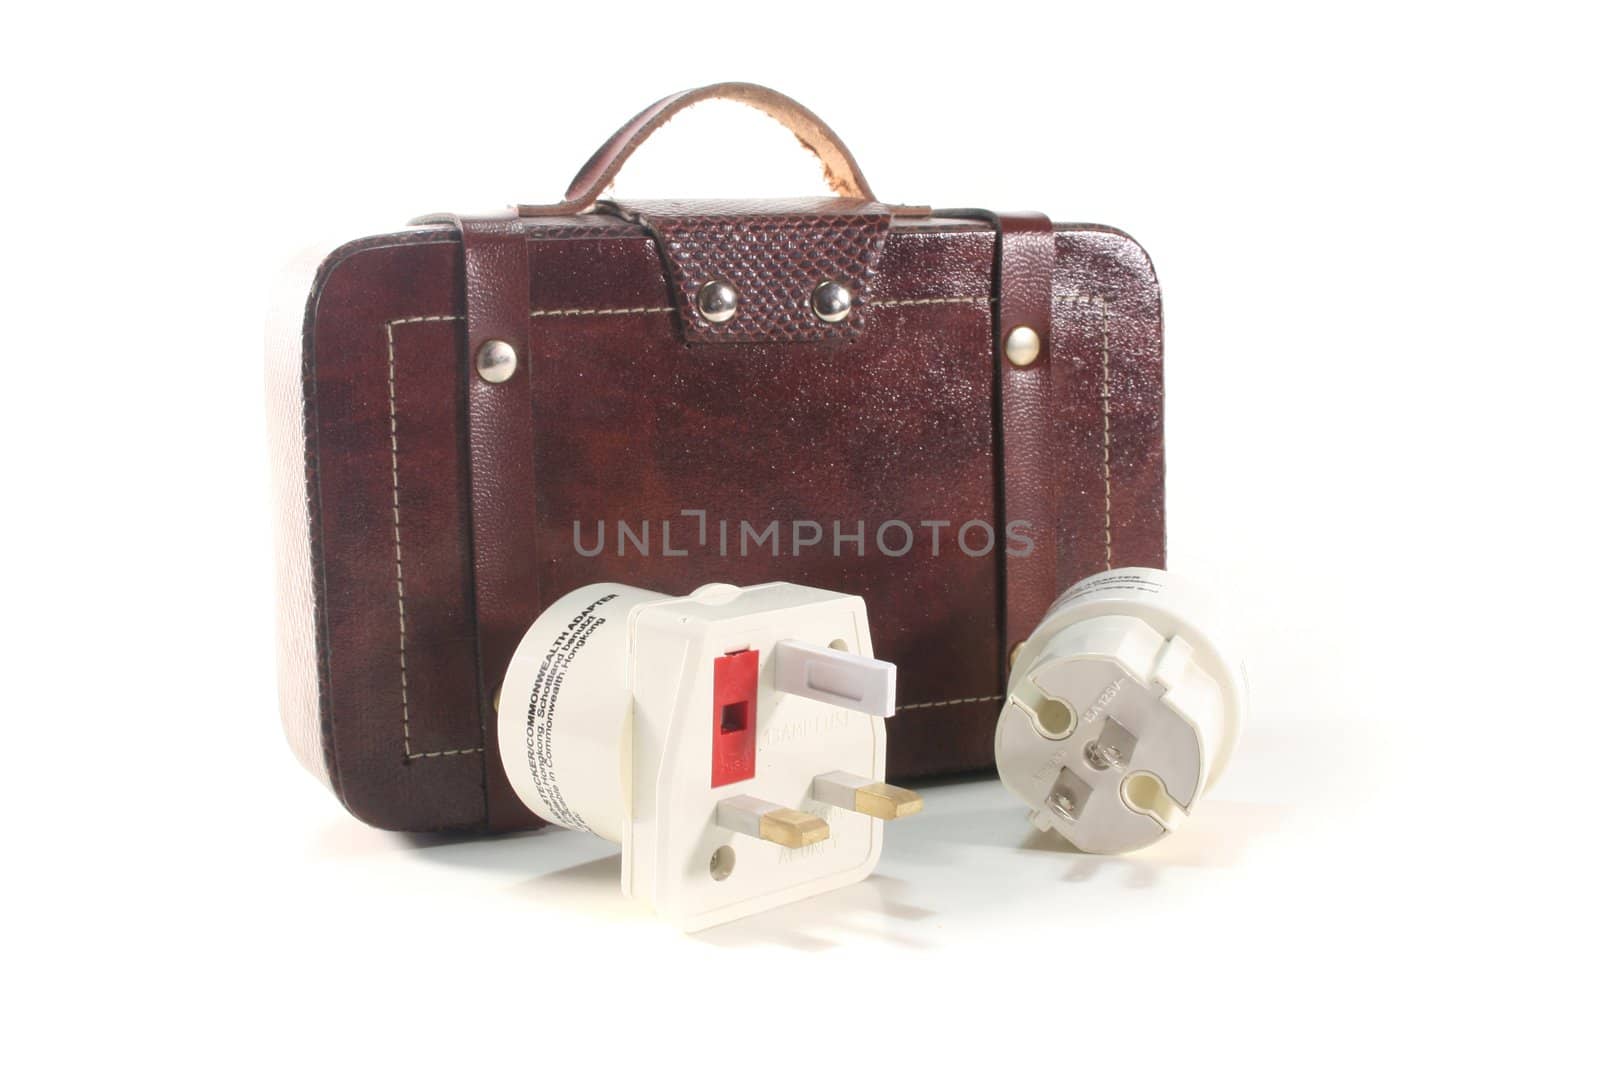 Travel Plug for Distance travel with luggage on white background